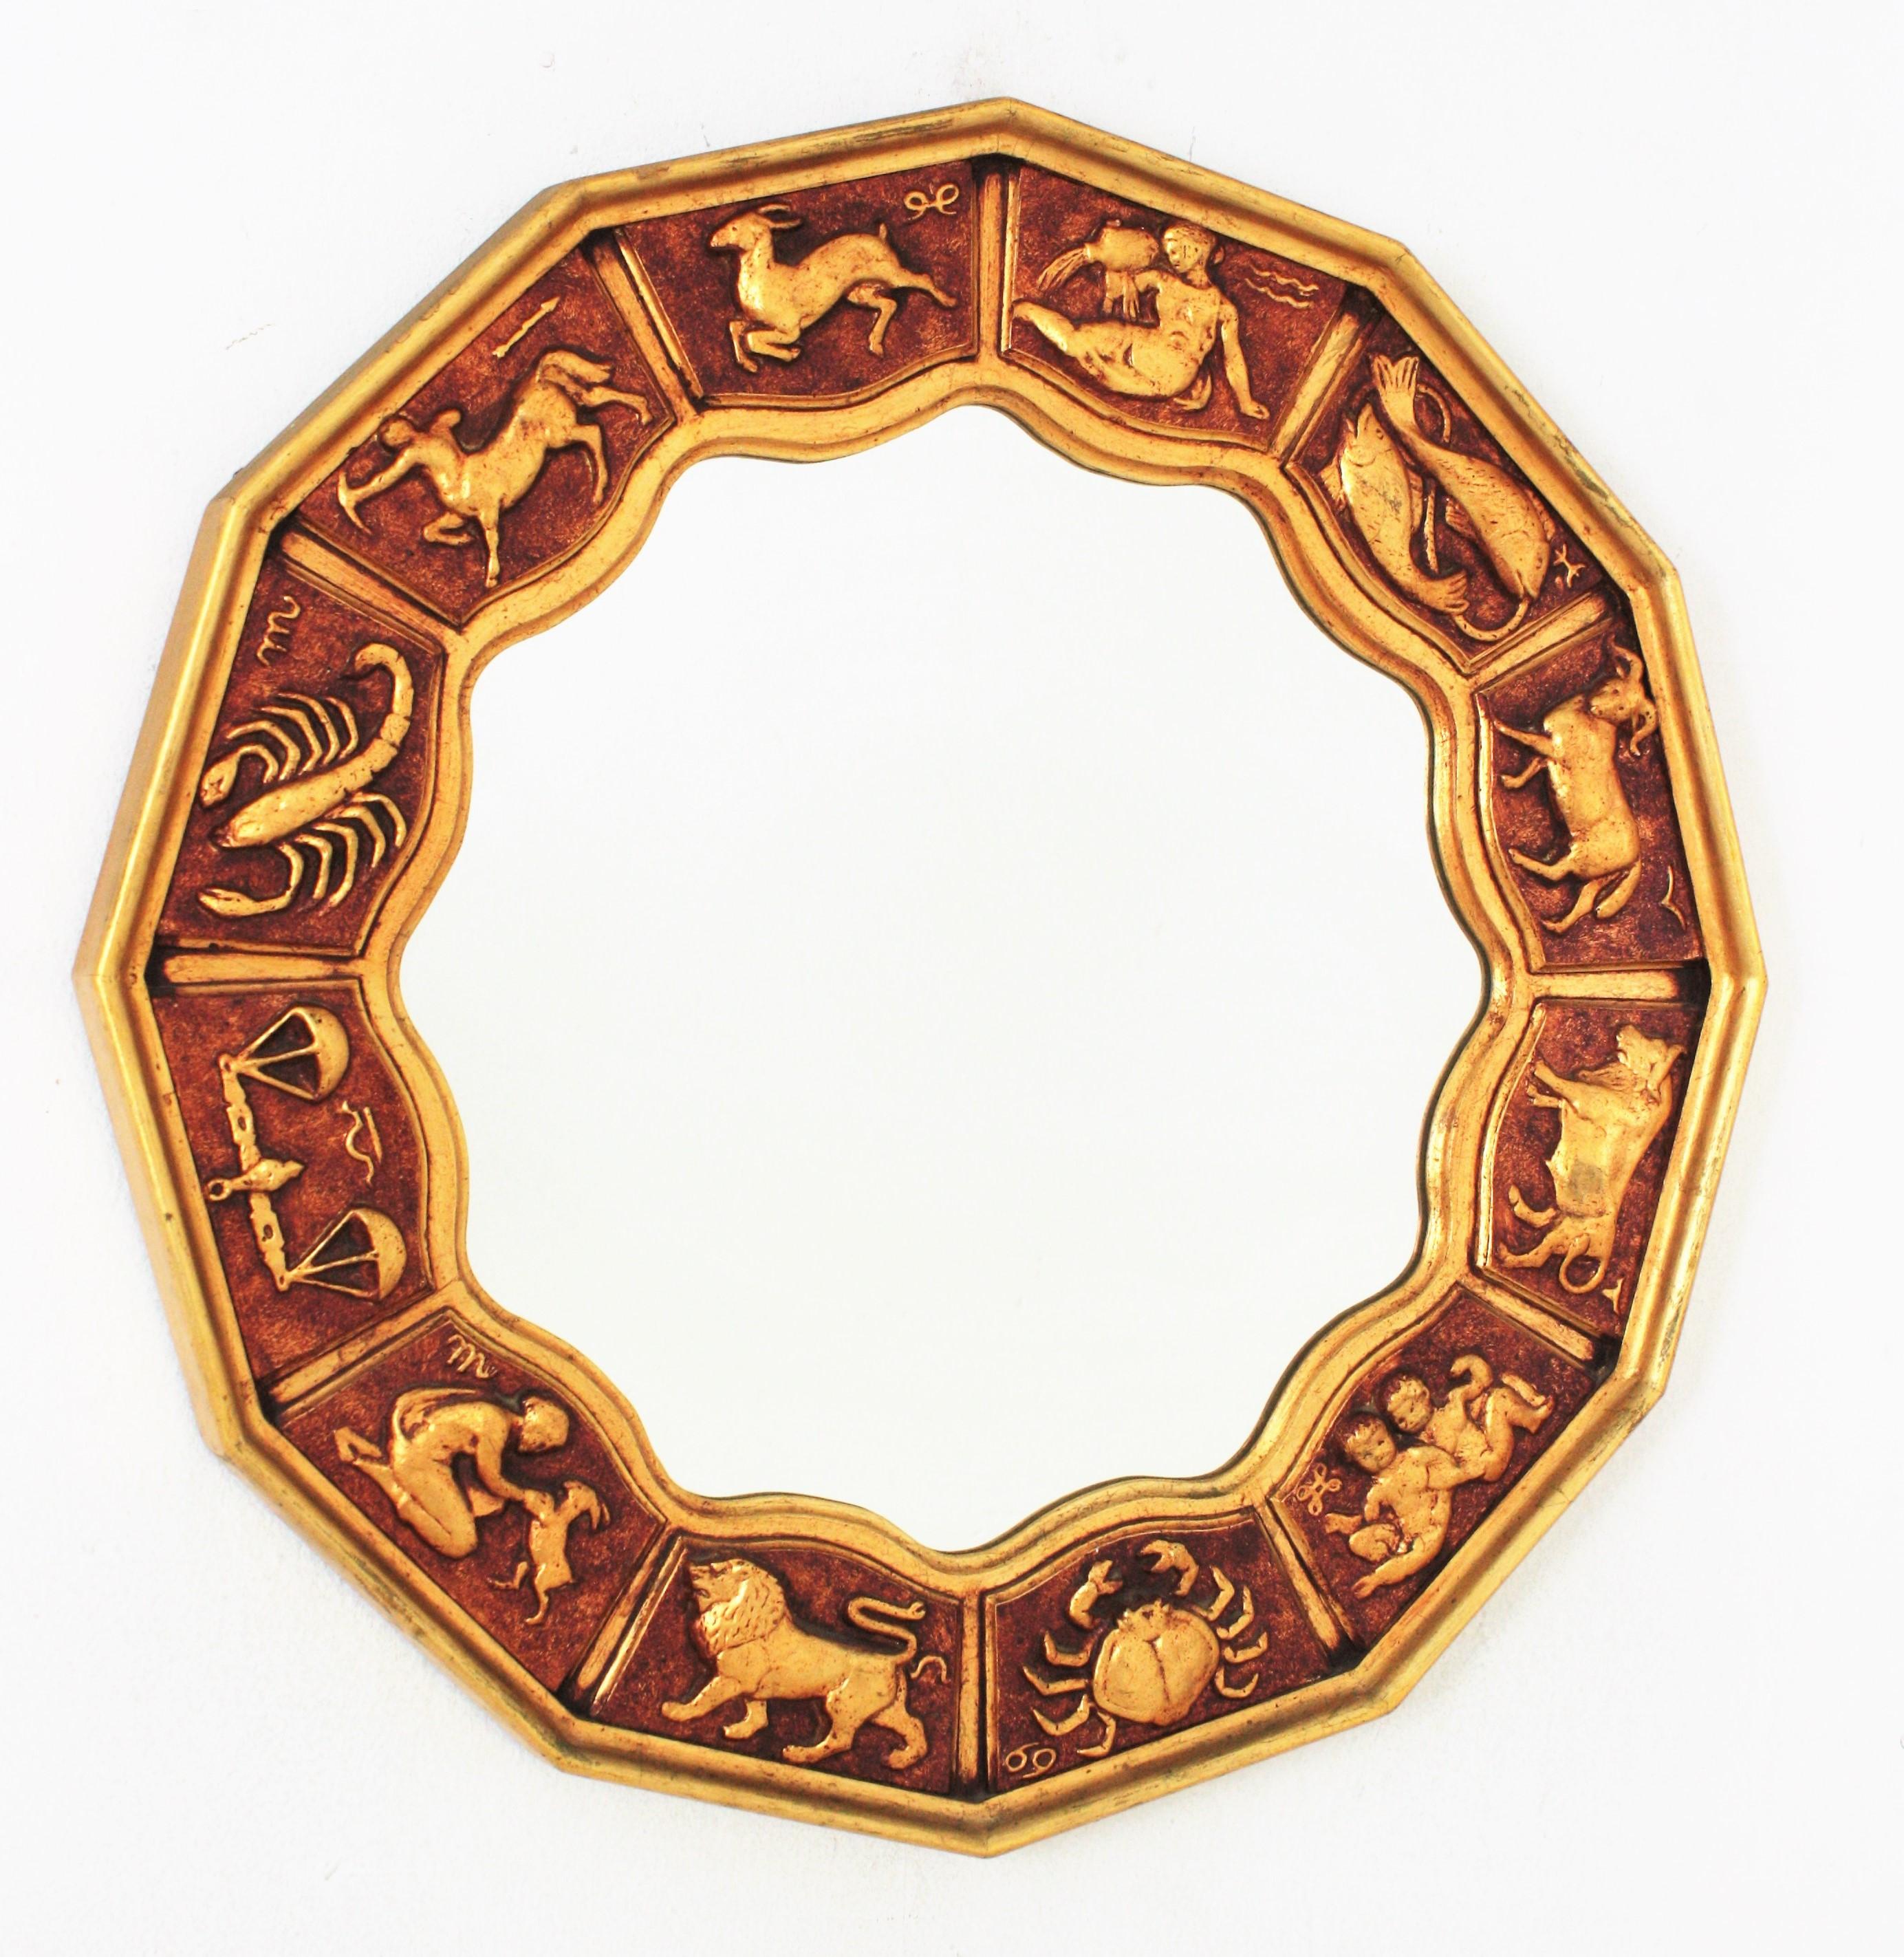 Zodiac dodecagon wall mirror in gilt carved wood, Spain, 1950s-1960s.
Handcrafted Horoscope round 12 sided (dodecagon) mirror with 12 signs of zodiac in giltwood.
Stylized hand carved zodiac signs on a polihedral wooden frame and scalloped edge